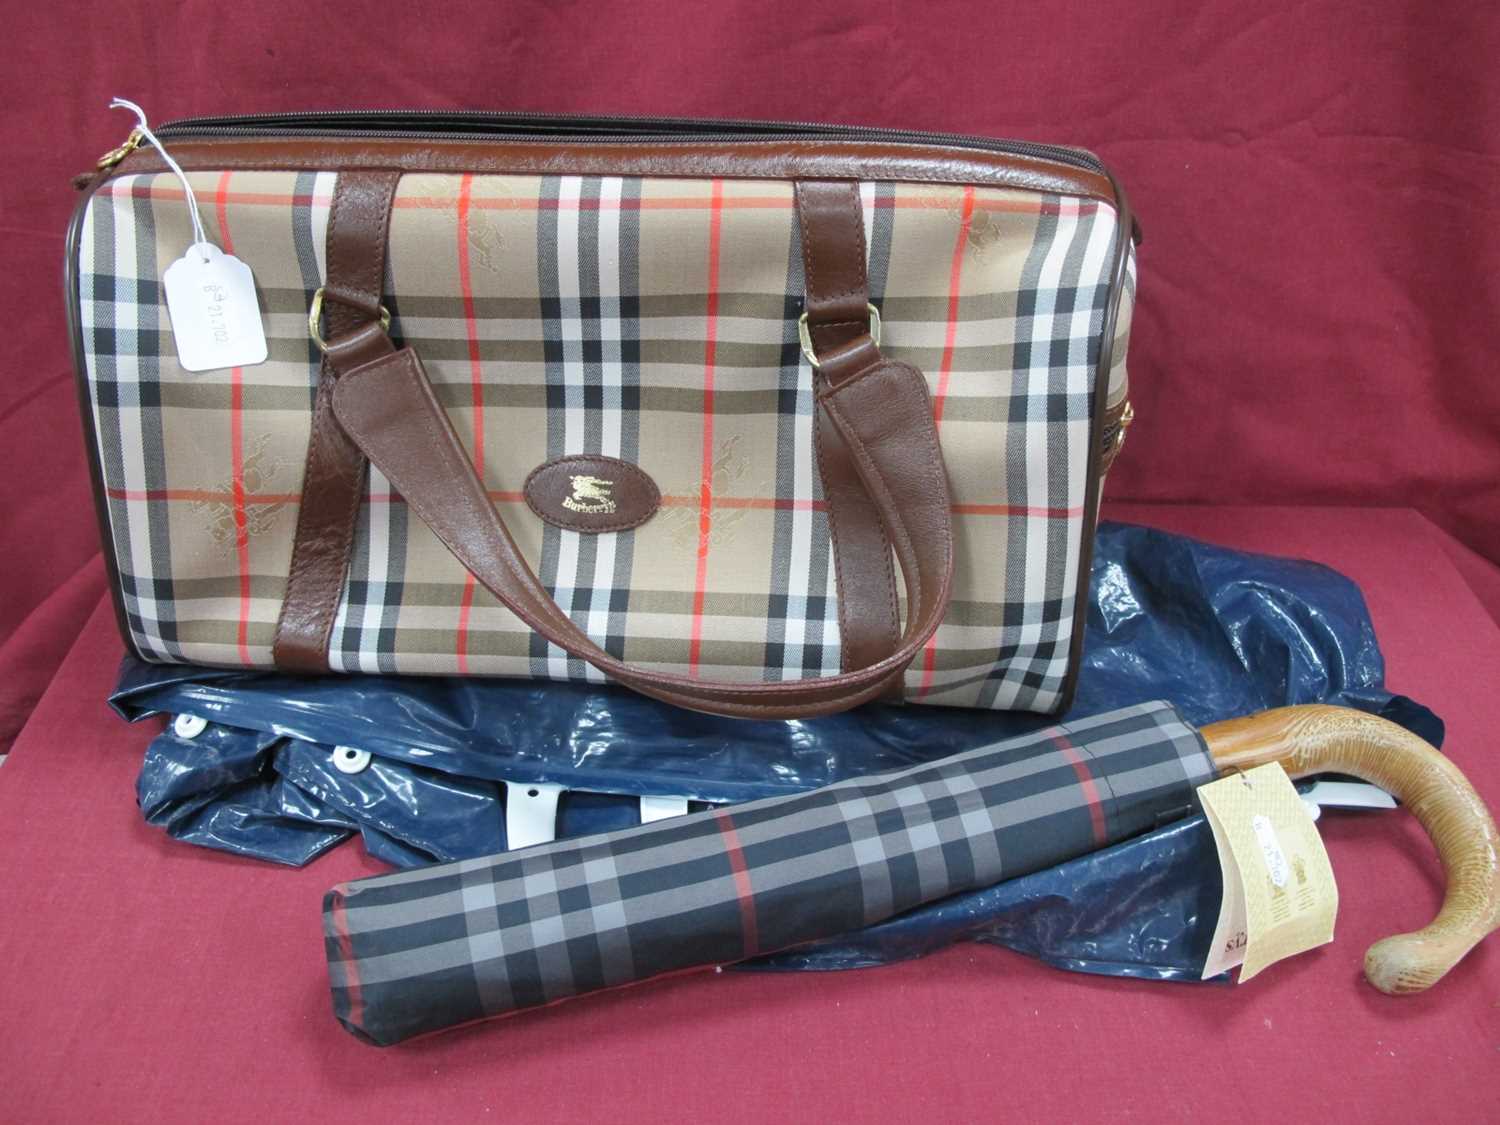 Burberry Holdall Bag, in real leather and traditional check. Burberry harrier umbrella. BAG WITH A